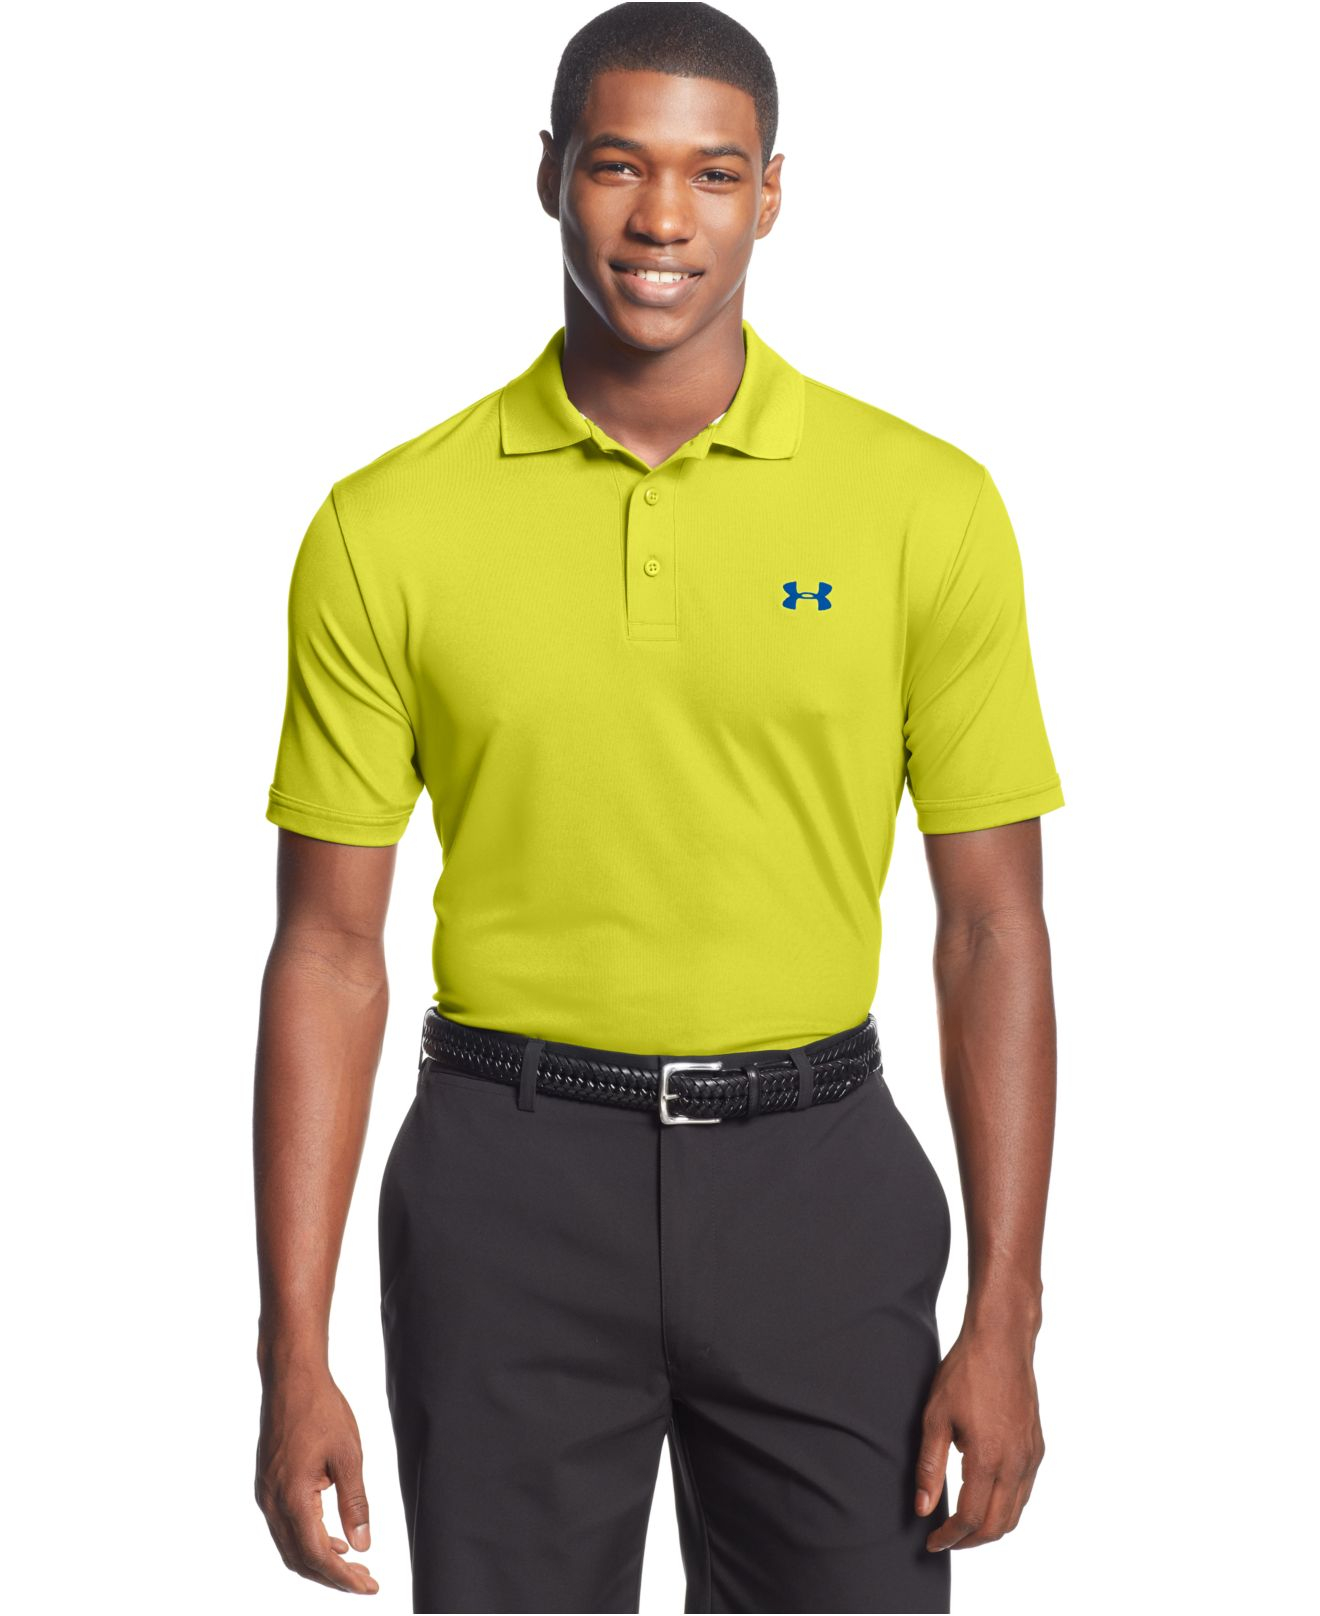 Under Armour 2.0 Performance Golf Polo in Yellow for Men - Lyst